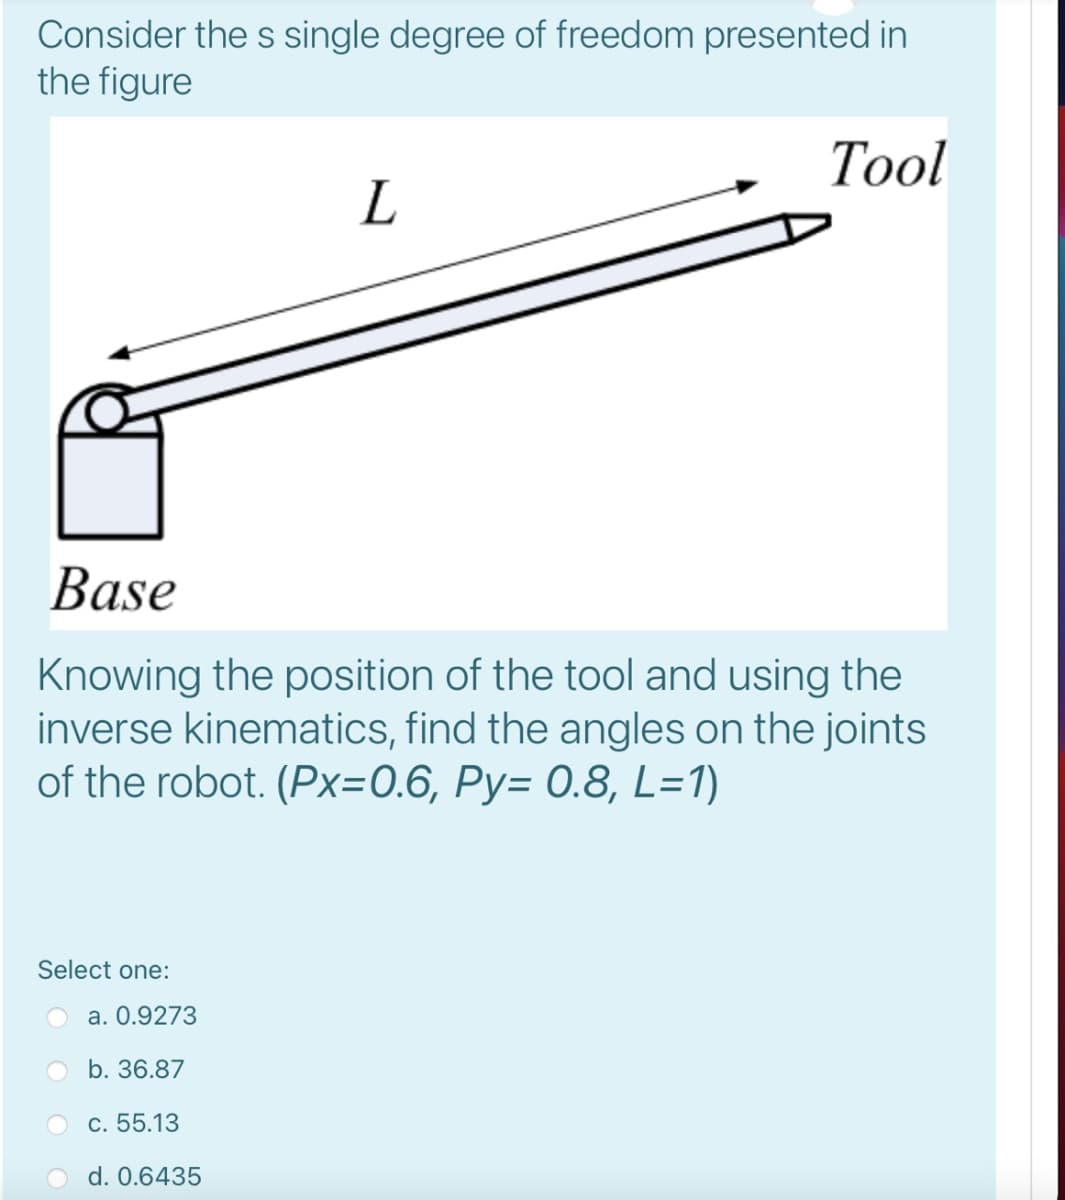 Consider the s single degree of freedom presented in
the figure
Тol
Base
Knowing the position of the tool and using the
inverse kinematics, find the angles on the joints
of the robot. (Px=0.6, Py= 0.8, L=1)
Select one:
a. 0.9273
b. 36.87
c. 55.13
d. 0.6435
